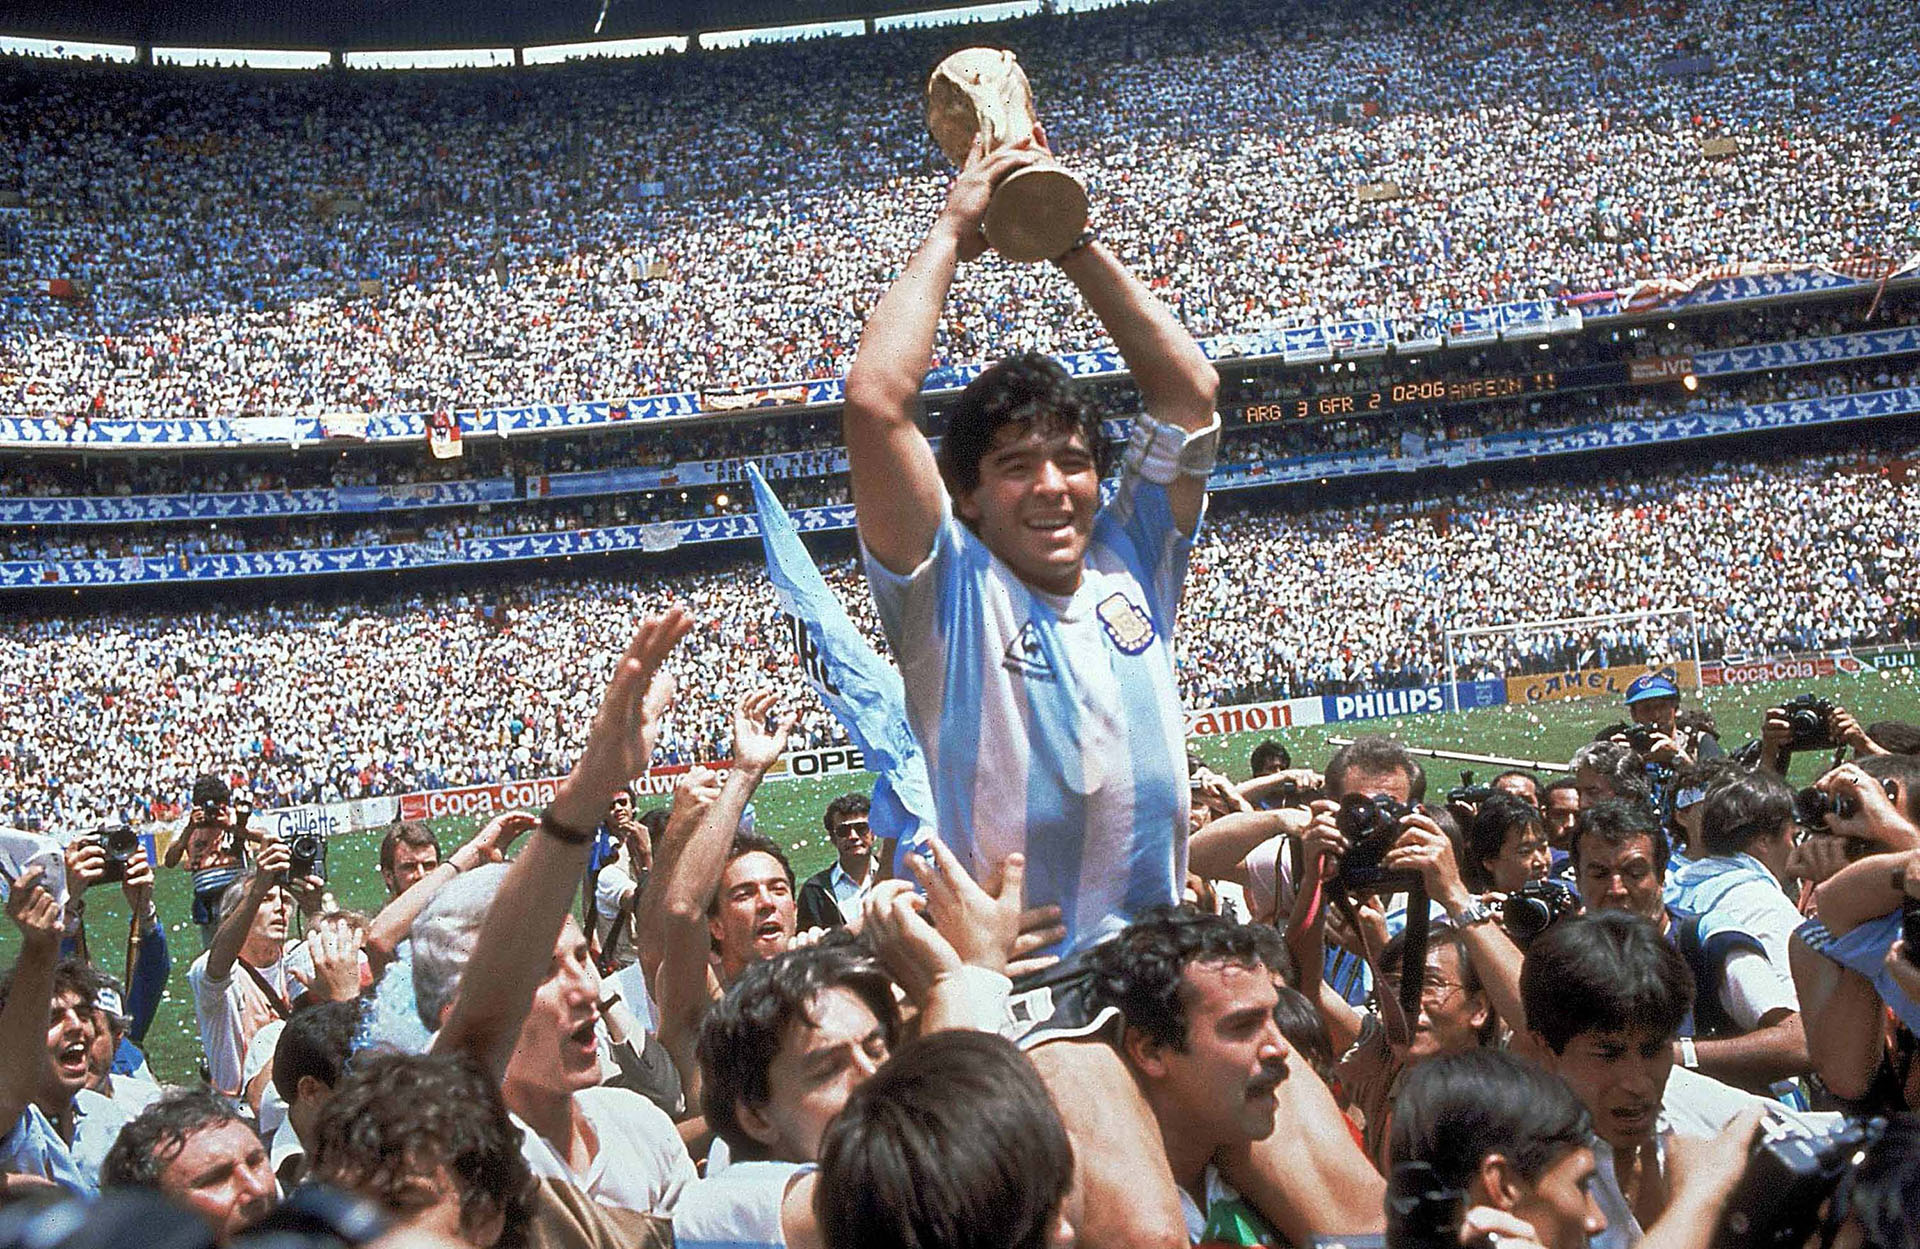 FILE - This is a June 29, 1986  file photo  of  Diego Maradona of Argentina celebrates with the cup at the end of the World Cup soccer final in the Atzeca Stadium, in Mexico City, Mexico. Argentina defeated West Germany 3-2 to take the trophy.   With one week to go before the World Cup starts in Brazil, The Associated Press takes a look at 10 great stars in the tournament's history. Maradona One the greatest playmakers of all time, Maradona was joint FIFA Player of the 20th Century with Pele. “El Pibe de Oro” inspired Argentina to victory in the 1986 tournament. The English will never forgive him for his “Hand of God” goal en route to winning the World Cup. And perhaps his own people, the Argentines, will never forgive him for being a terrible coach for the national team at the World Cup four years ago in South Africa. But as player, Maradona was peerless during his heyday, although drug problems marred the end of his career. (AP Photo/Carlo Fumagalli, File)